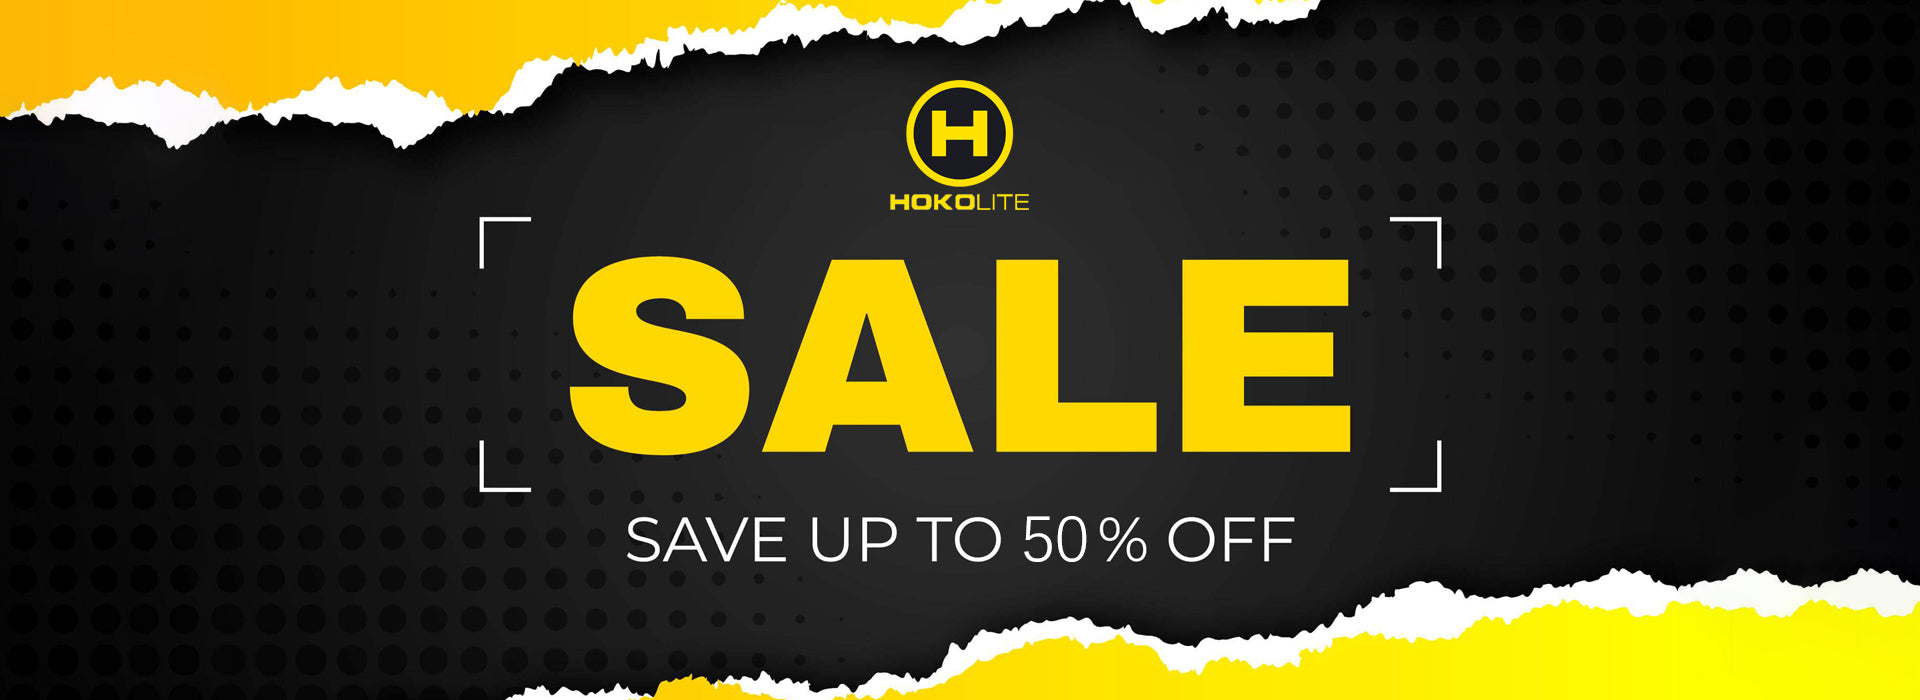 SALE-SAVE UP TO 50% OFF